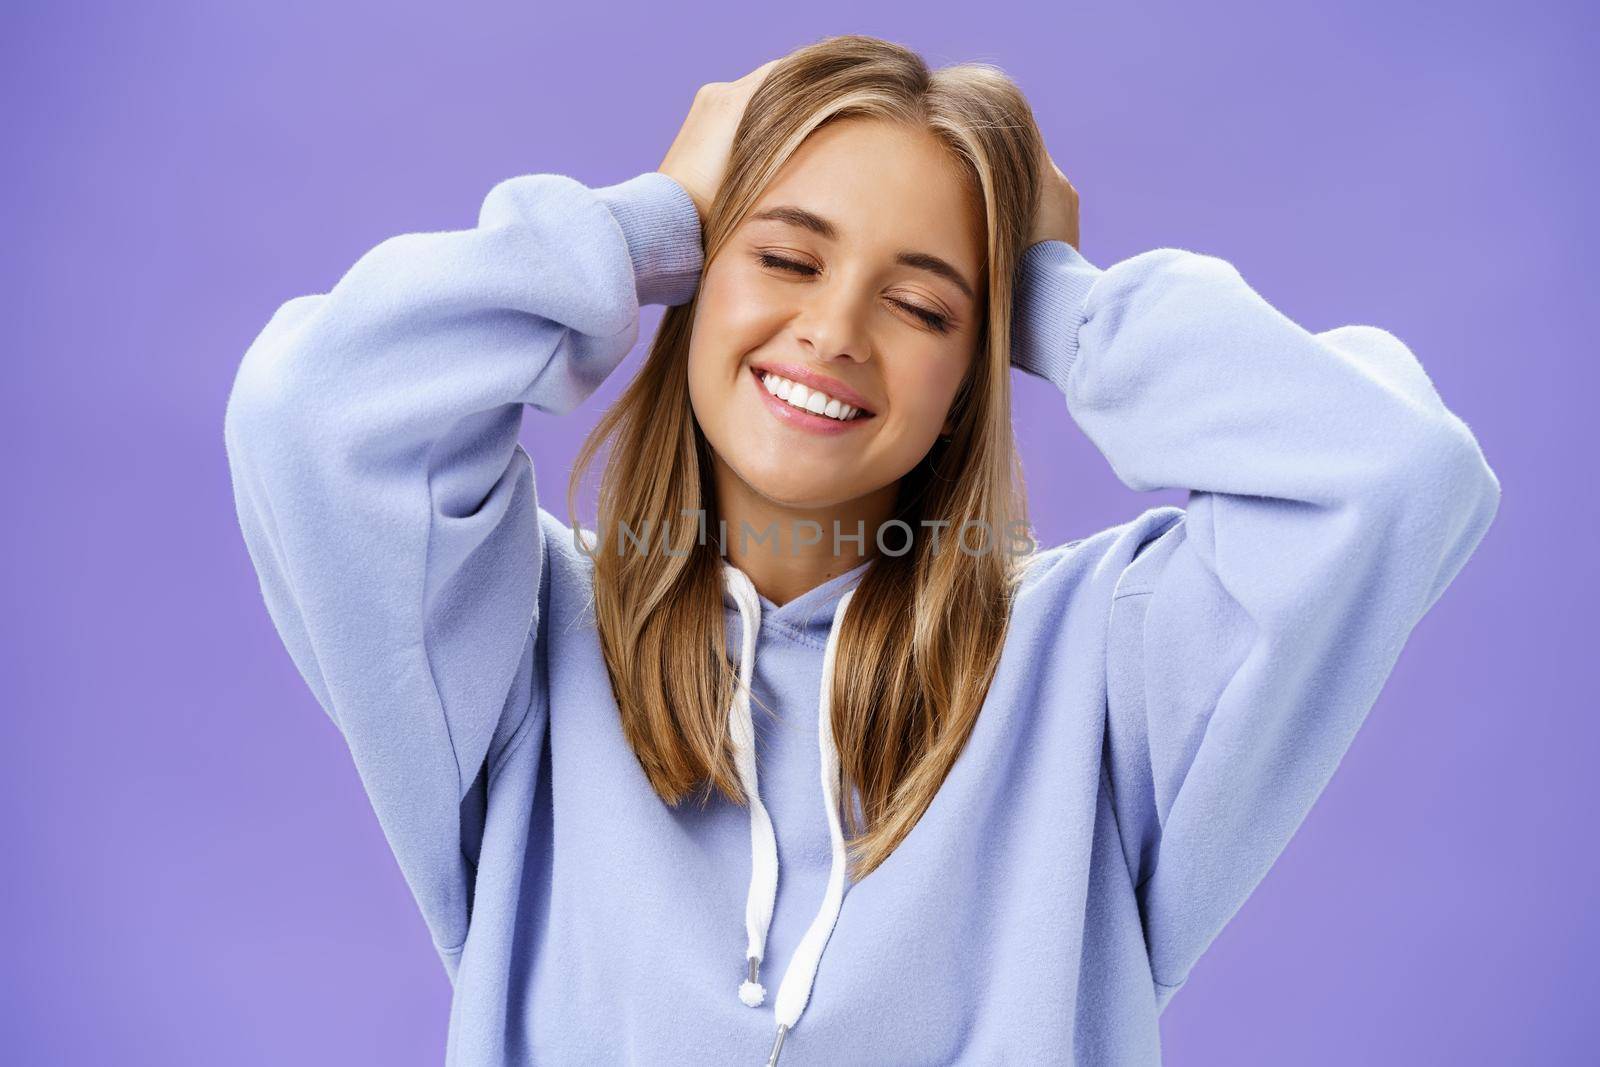 Tender relaxed charming woman with blond hair touching head joyfully smiling broadly with closed eyes daydreaming posing in trendy hoodie against purple wall finally getting rid of acne and pimples by Benzoix